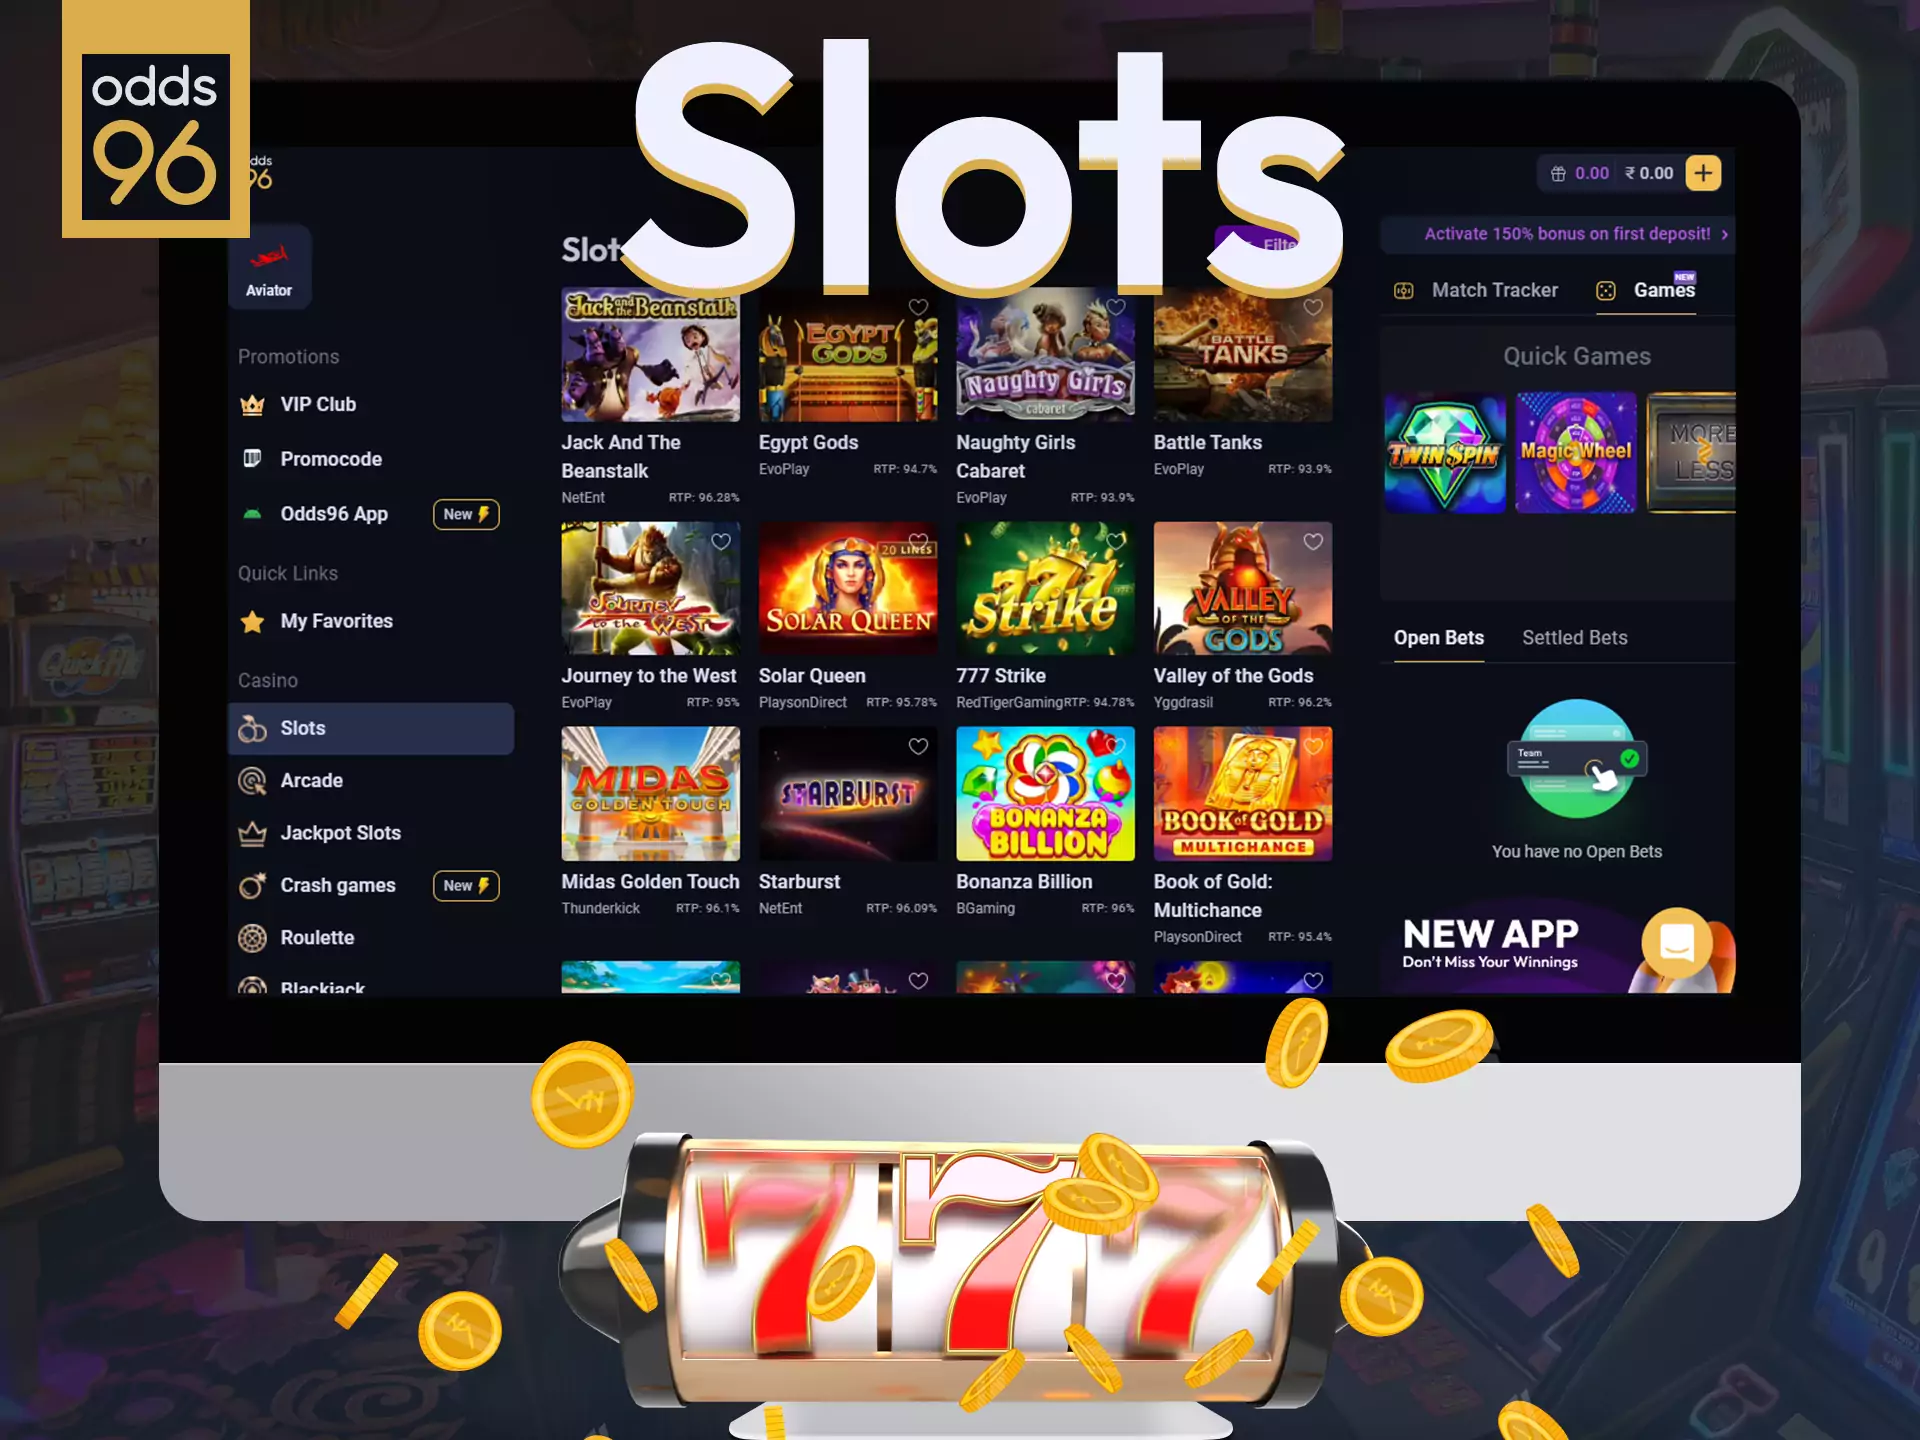 Place bets at Odds96 casino on slots.